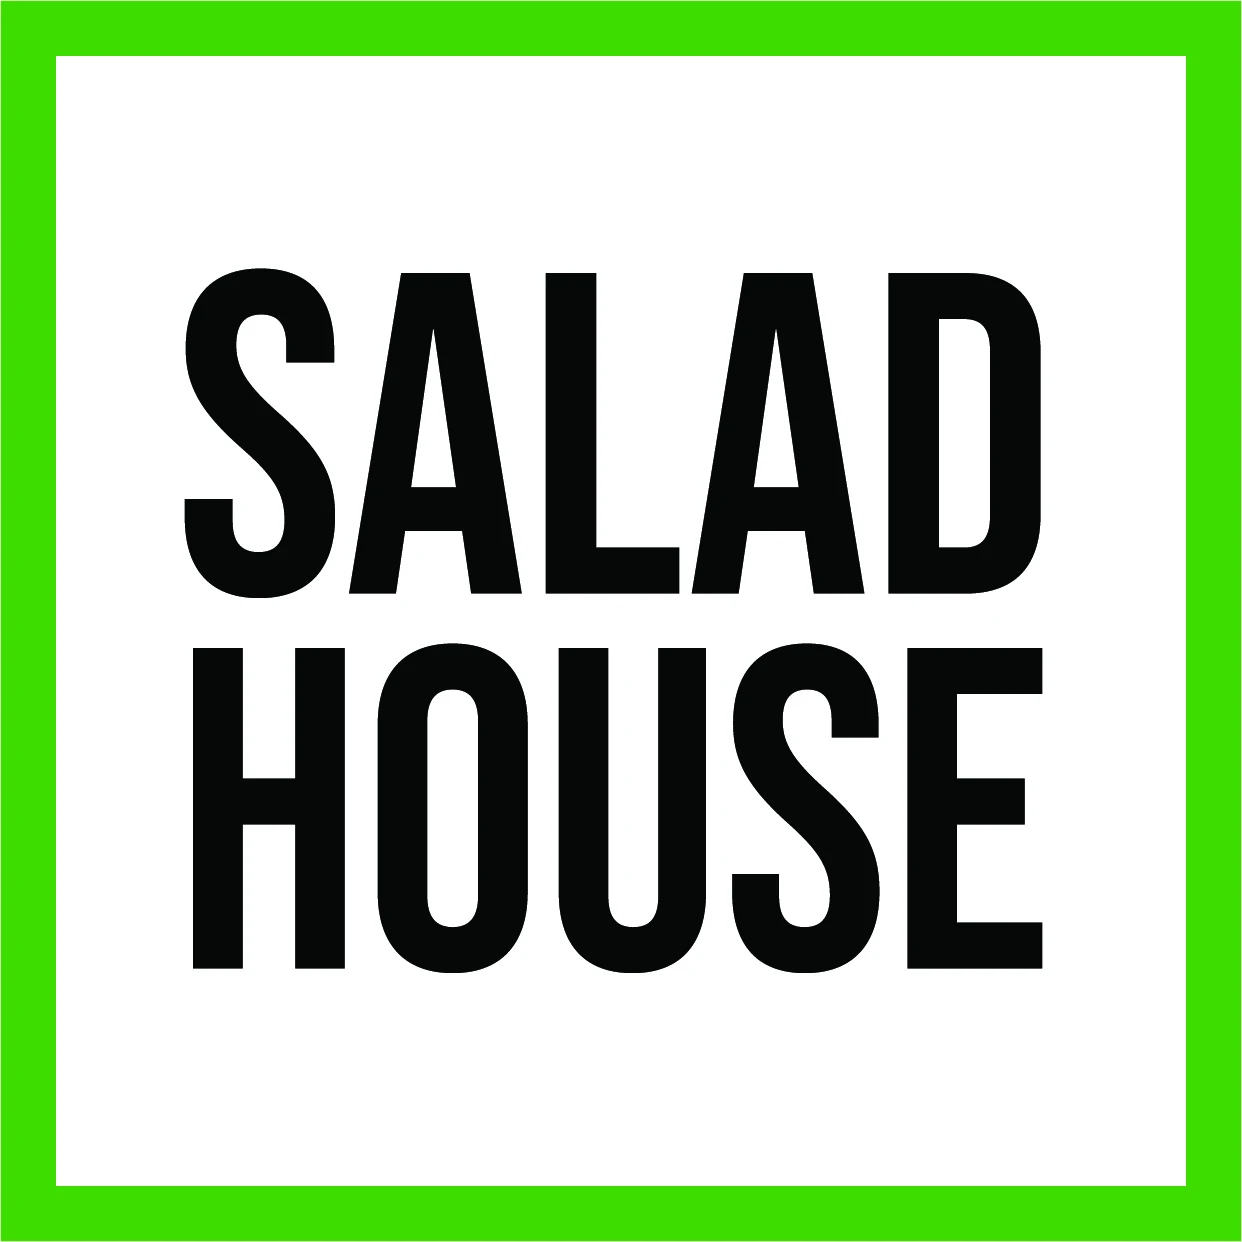 The Salad House Cupones 